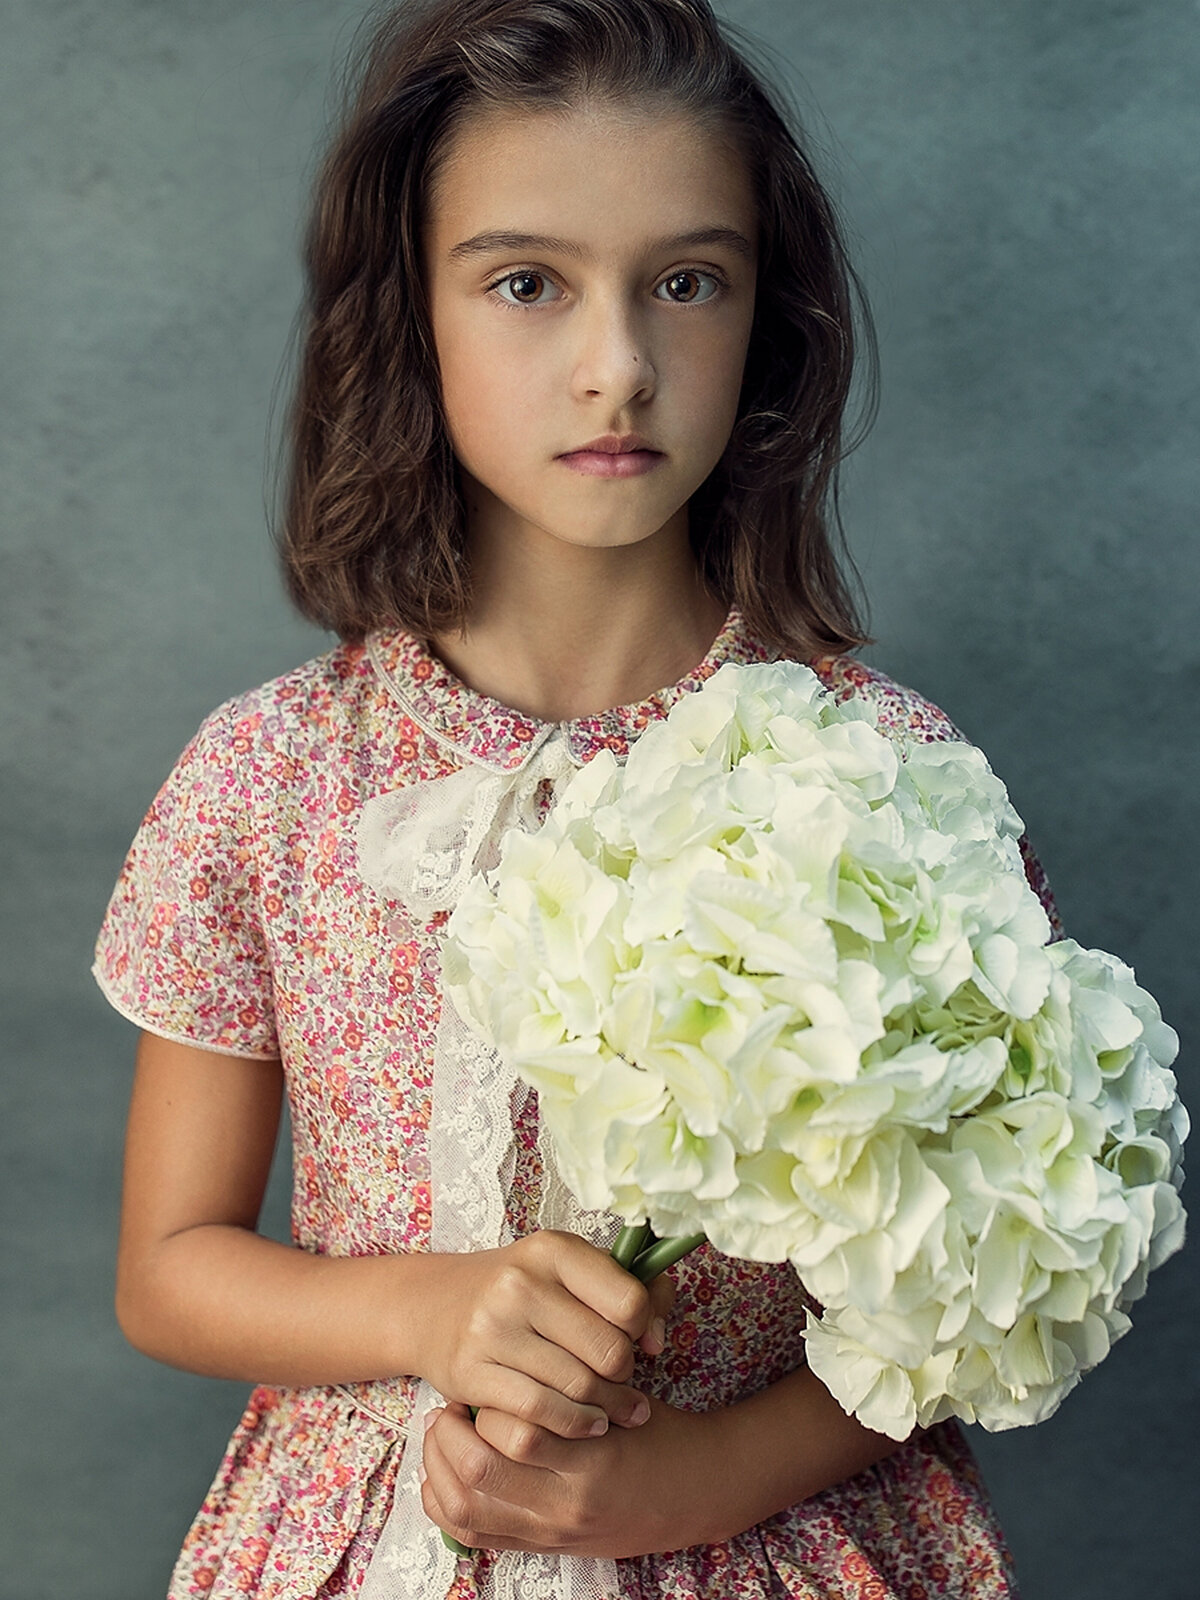 A portrait of a girl holding  a bunch of white flowers looking at the camera